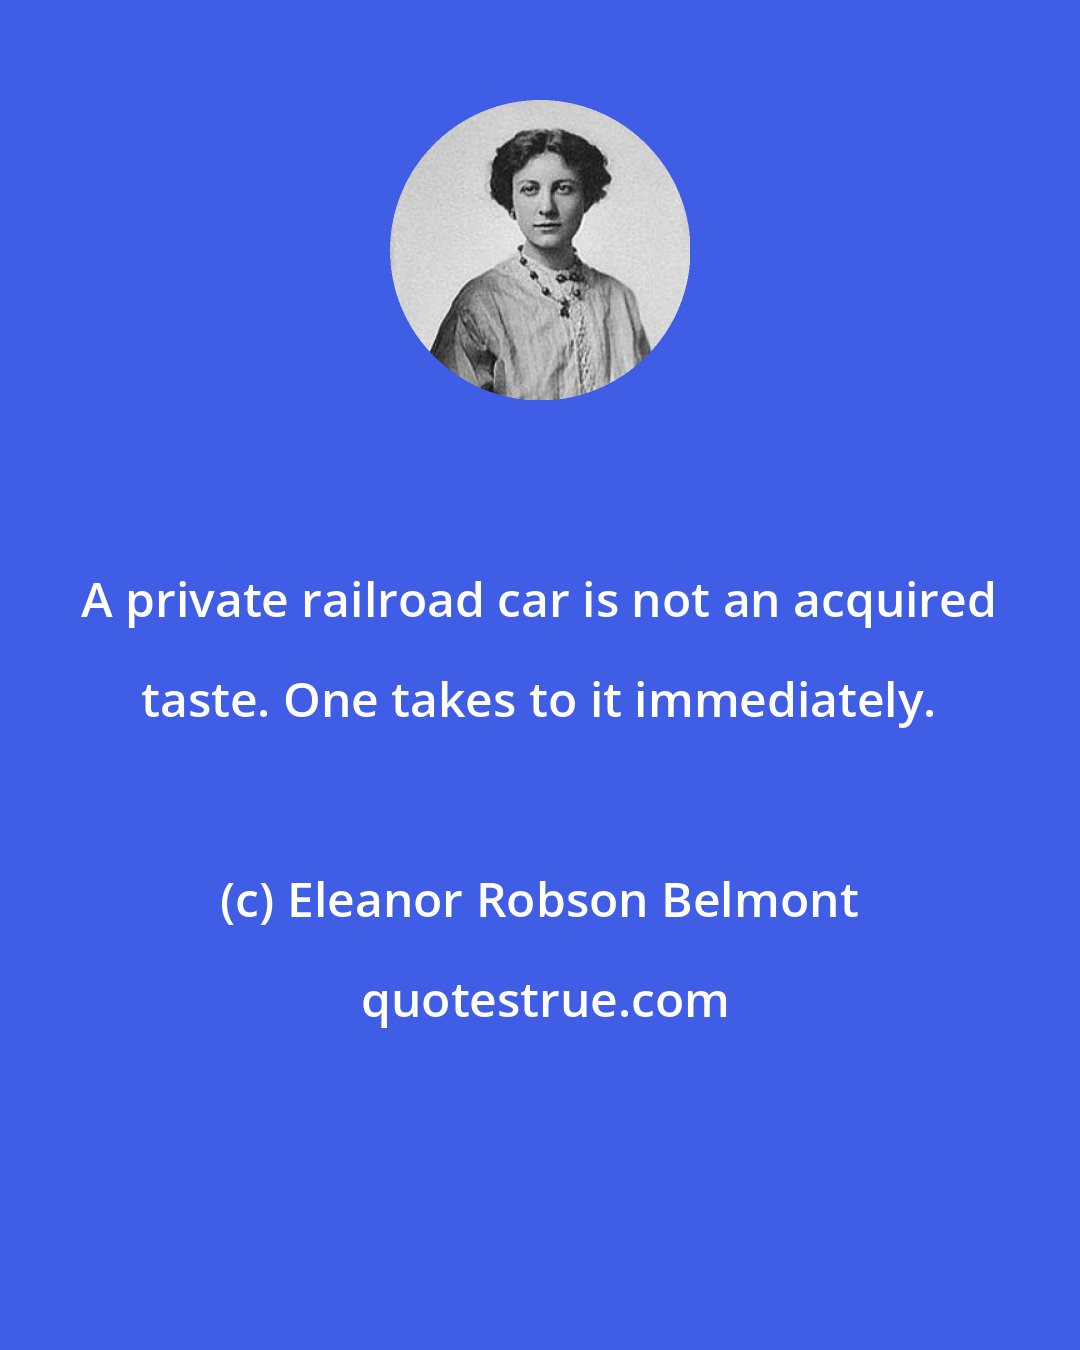 Eleanor Robson Belmont: A private railroad car is not an acquired taste. One takes to it immediately.